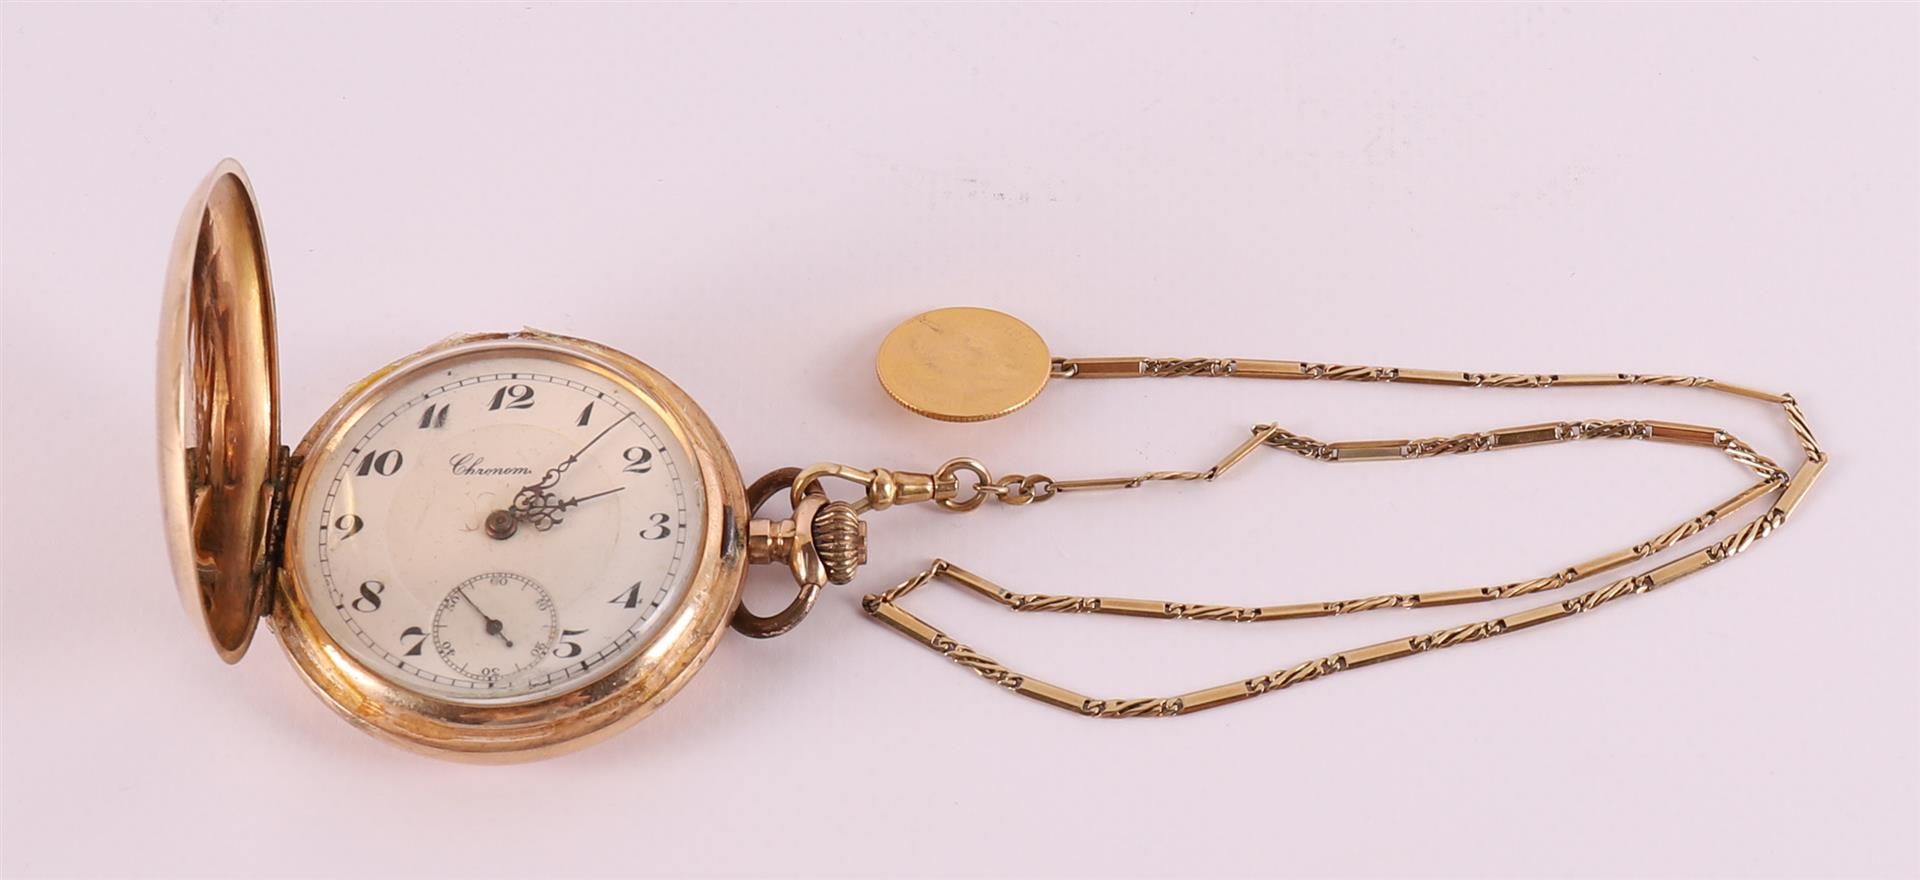 A men's vest pocket watch in 14 kt 585/1000 gold case and ditto gold watch chain with gold five